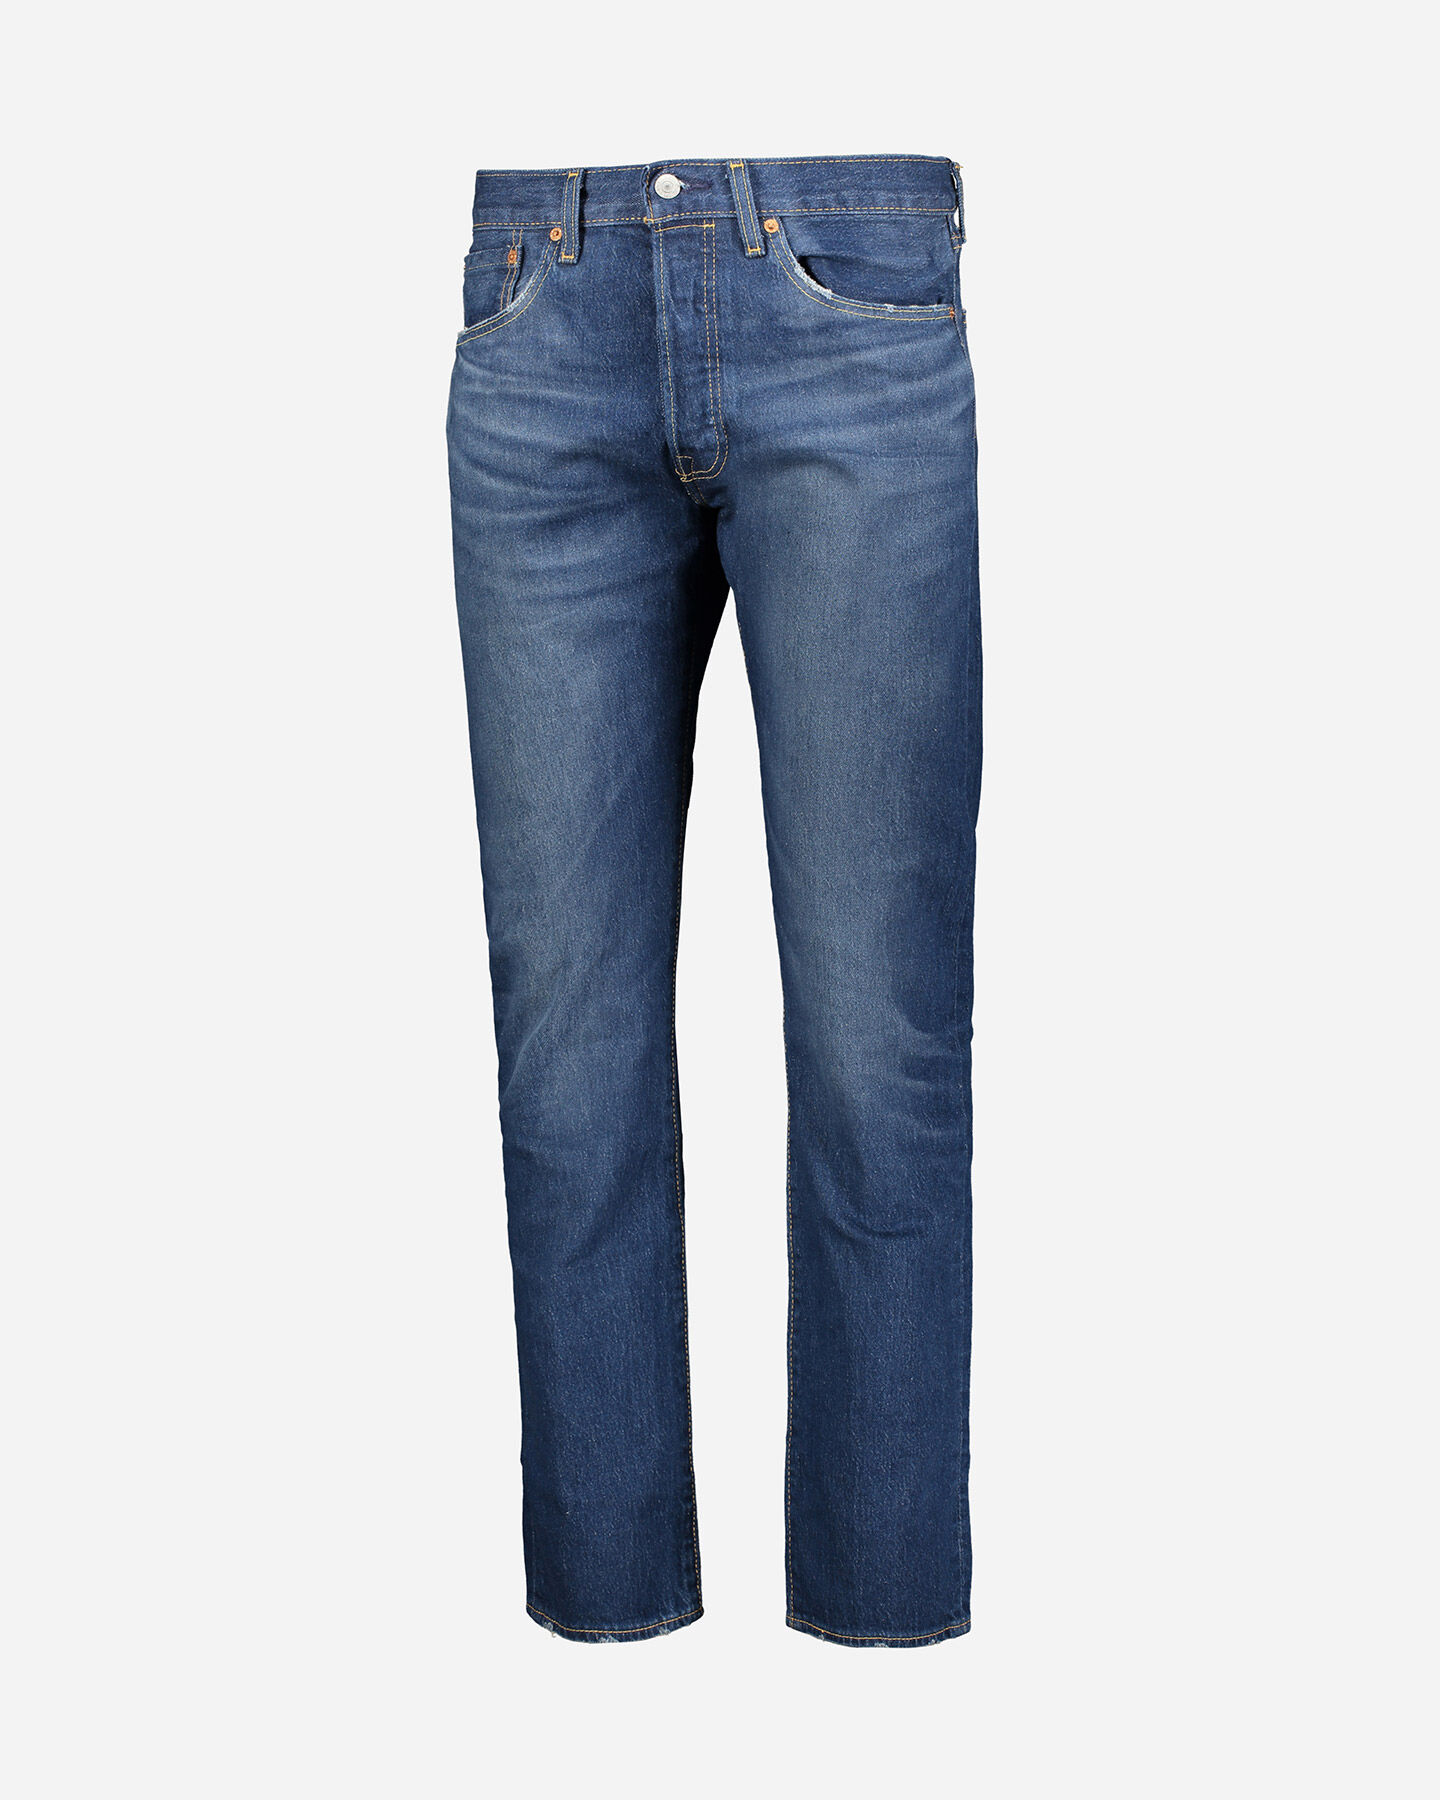  Jeans LEVI'S 501 REGULAR M S4082676|3106|30 scatto 0